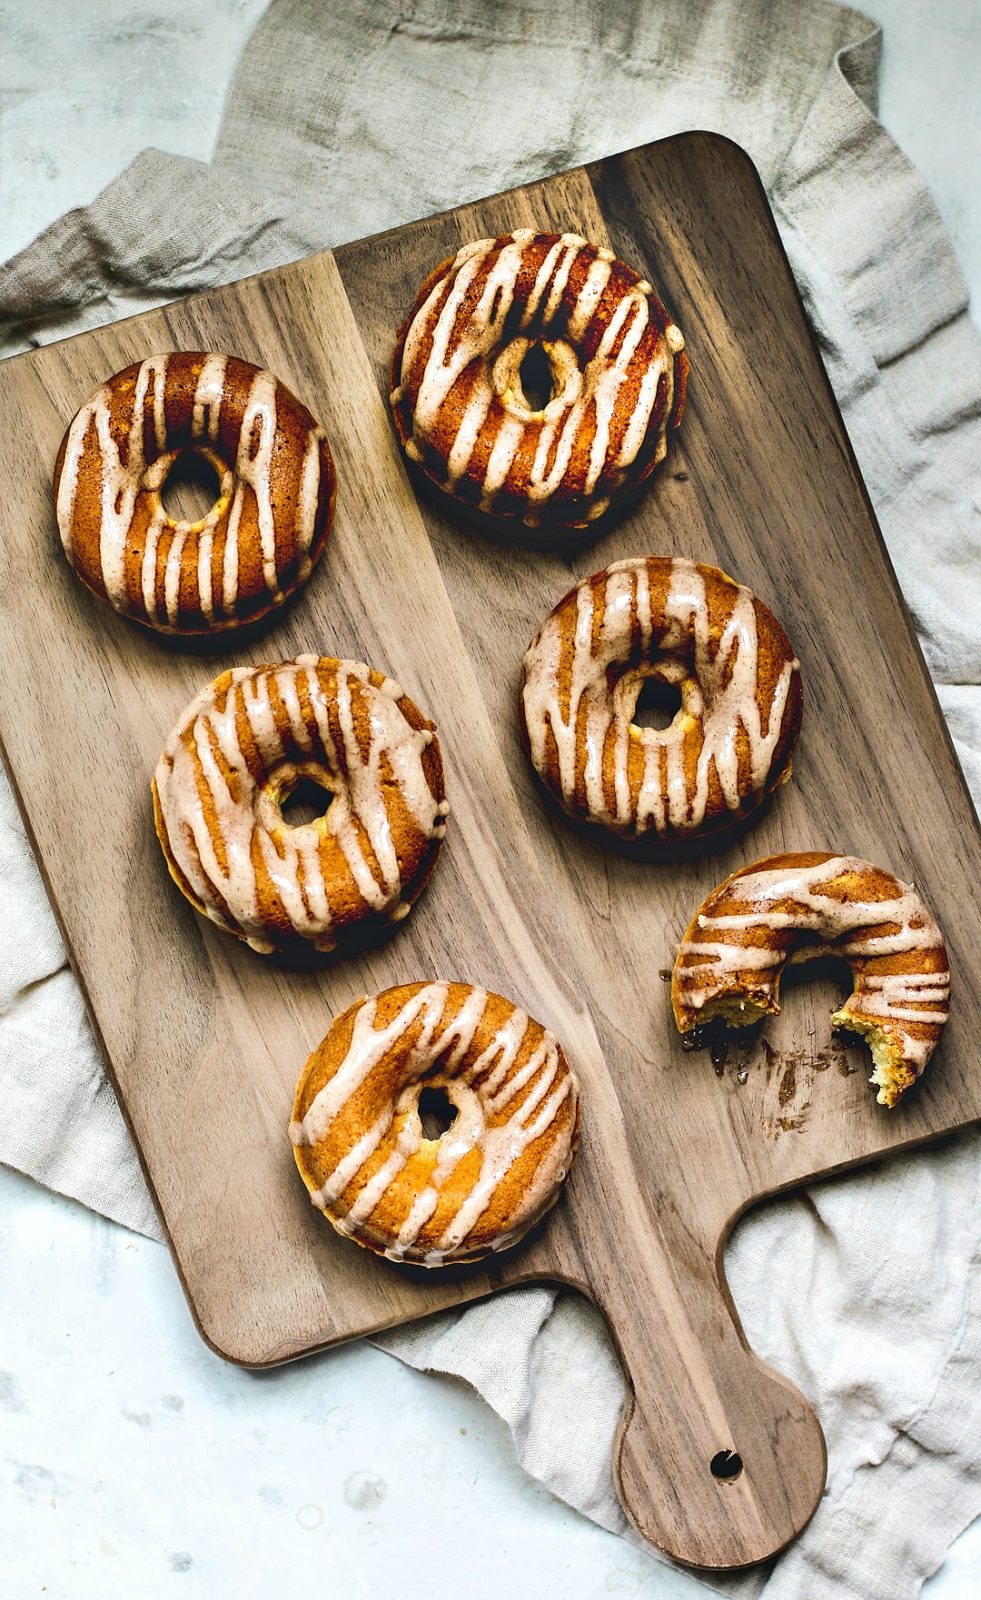 Eggnog donuts drizzled with glaze.